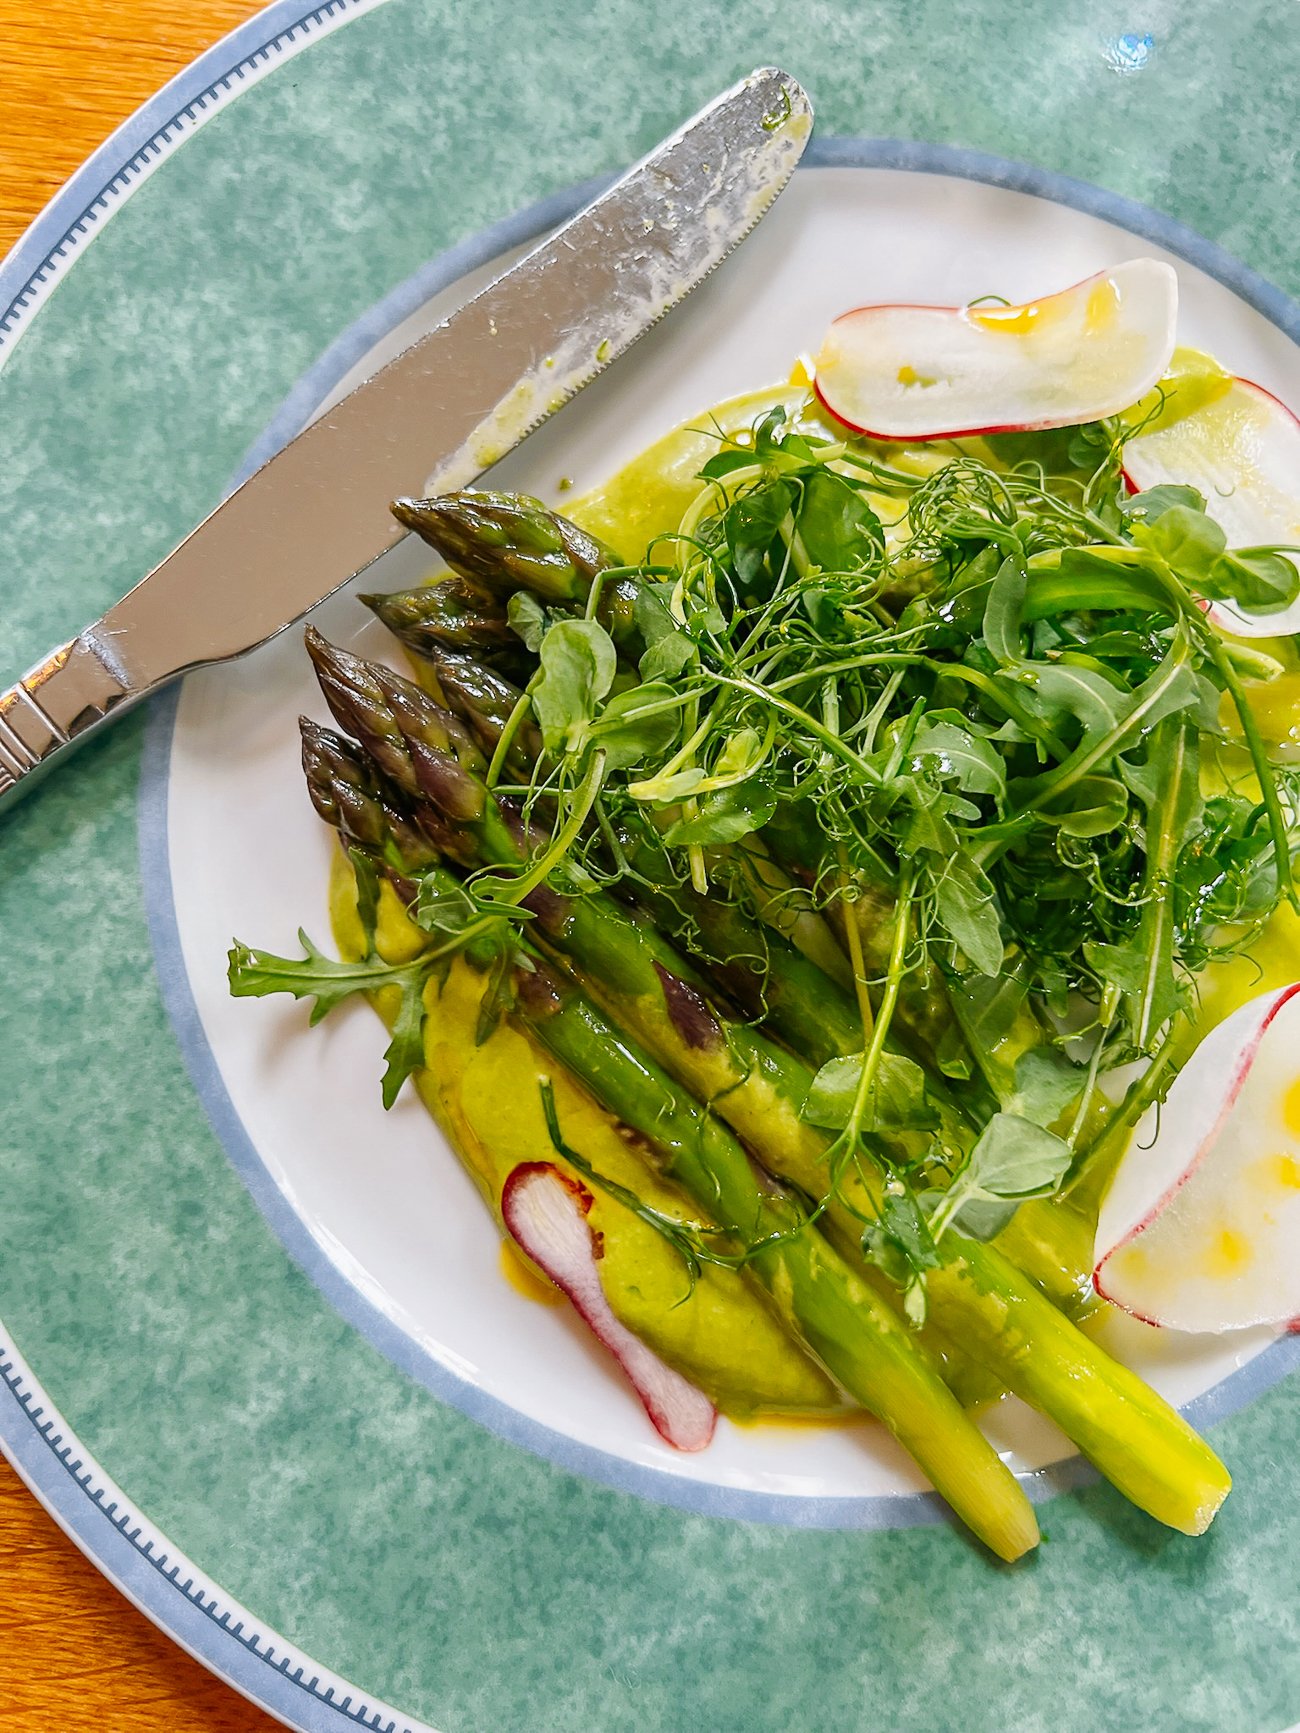 Asparagus and watercress mayo with frilly salad leaves and radish slices